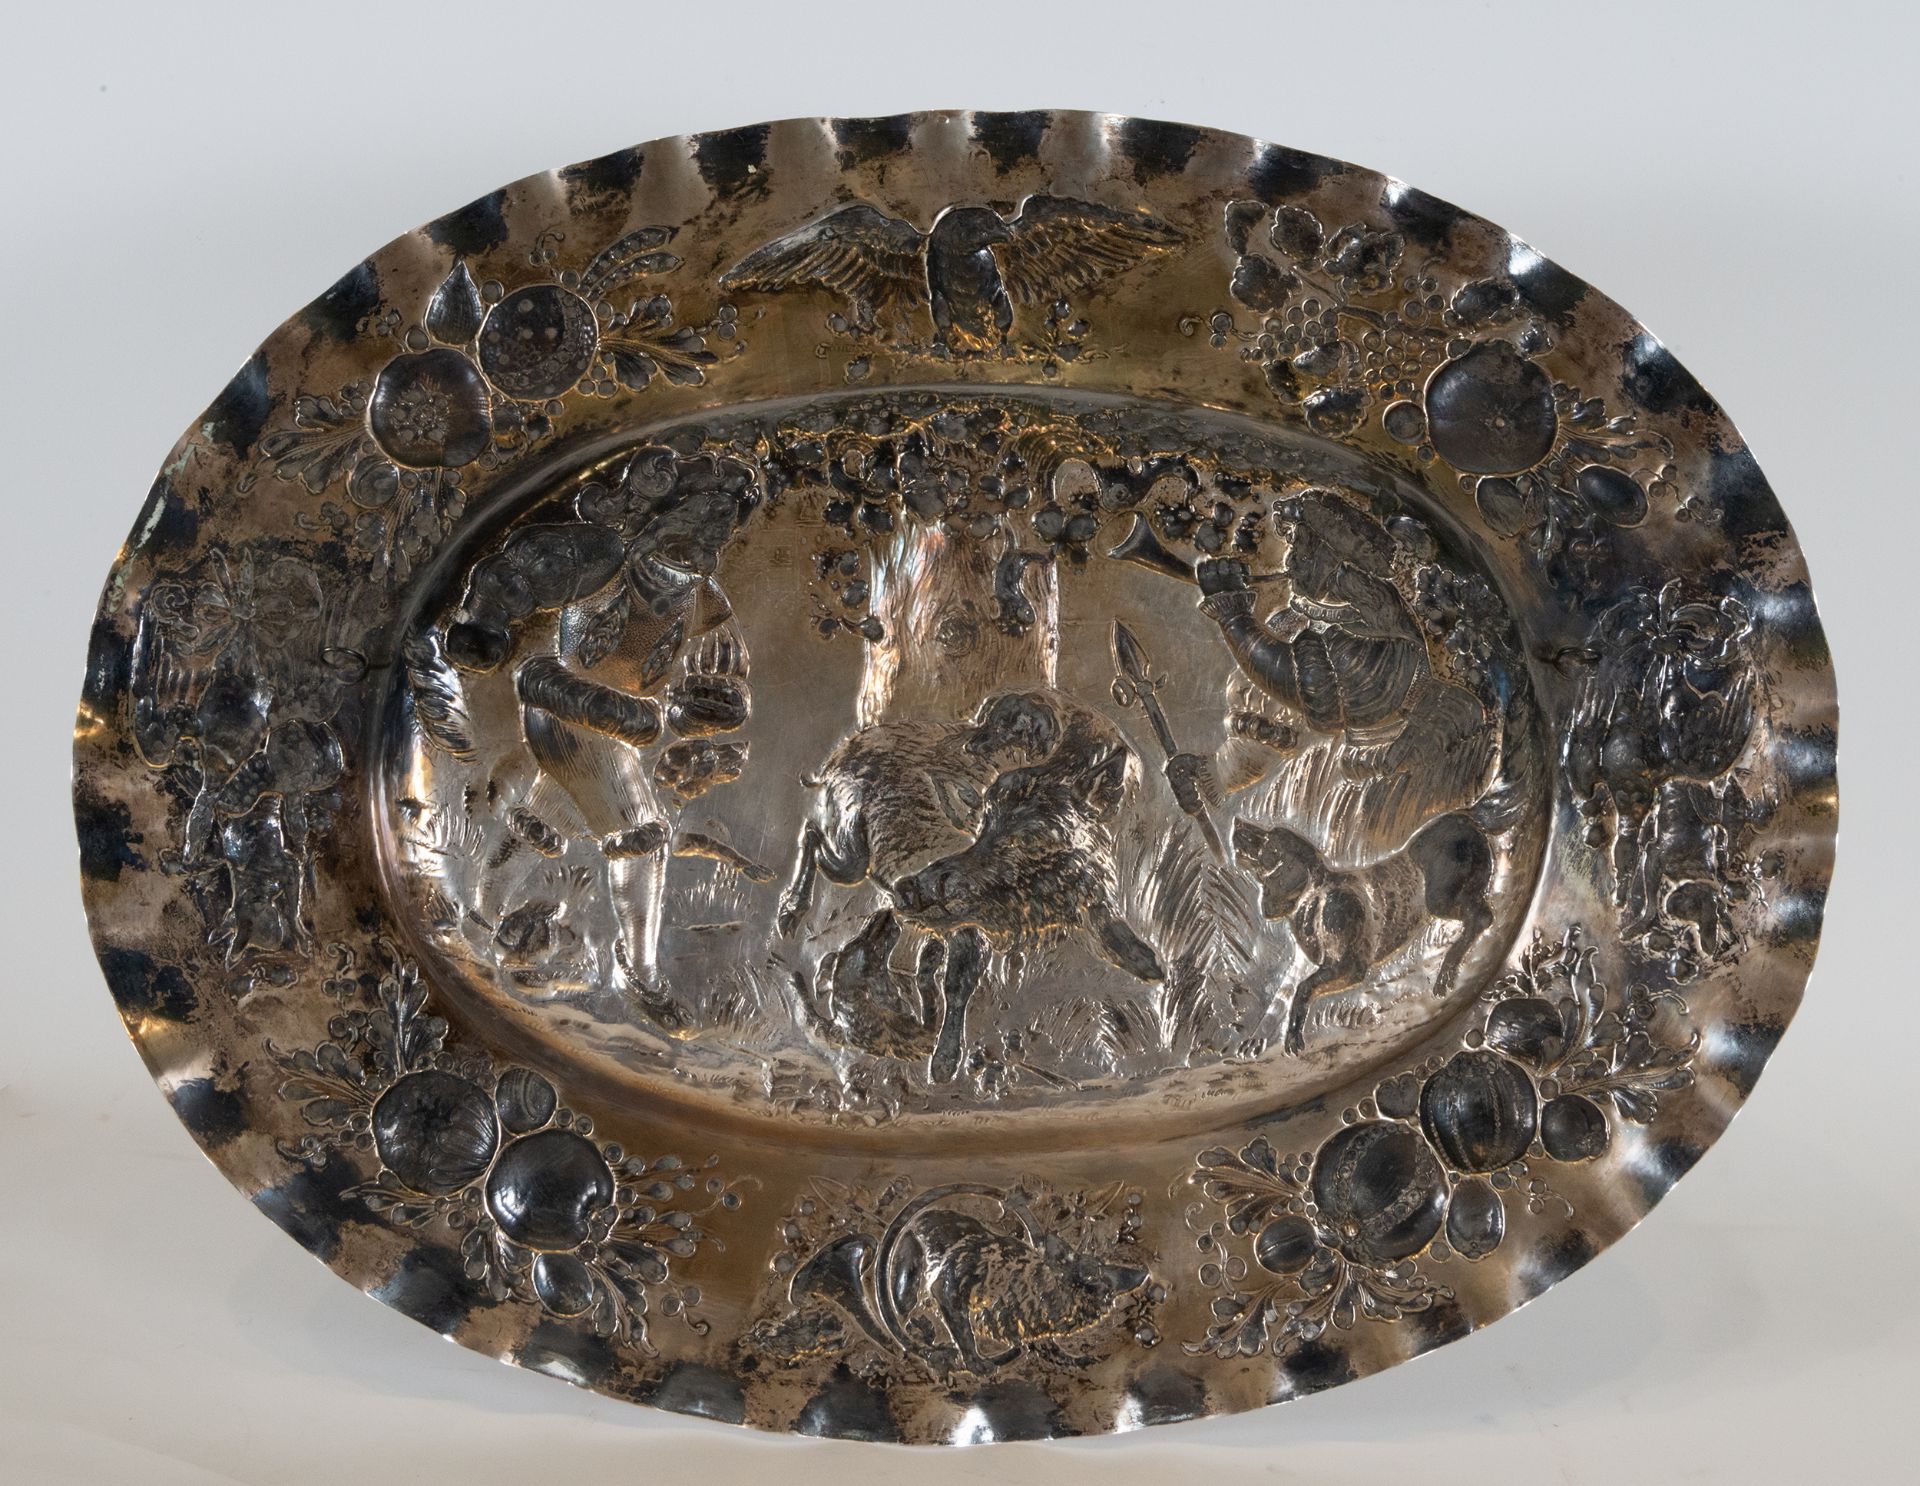 Large Pair of Sterling Silver Trays with Chivalry Motifs, Marks of England, 19th Century - Image 12 of 12